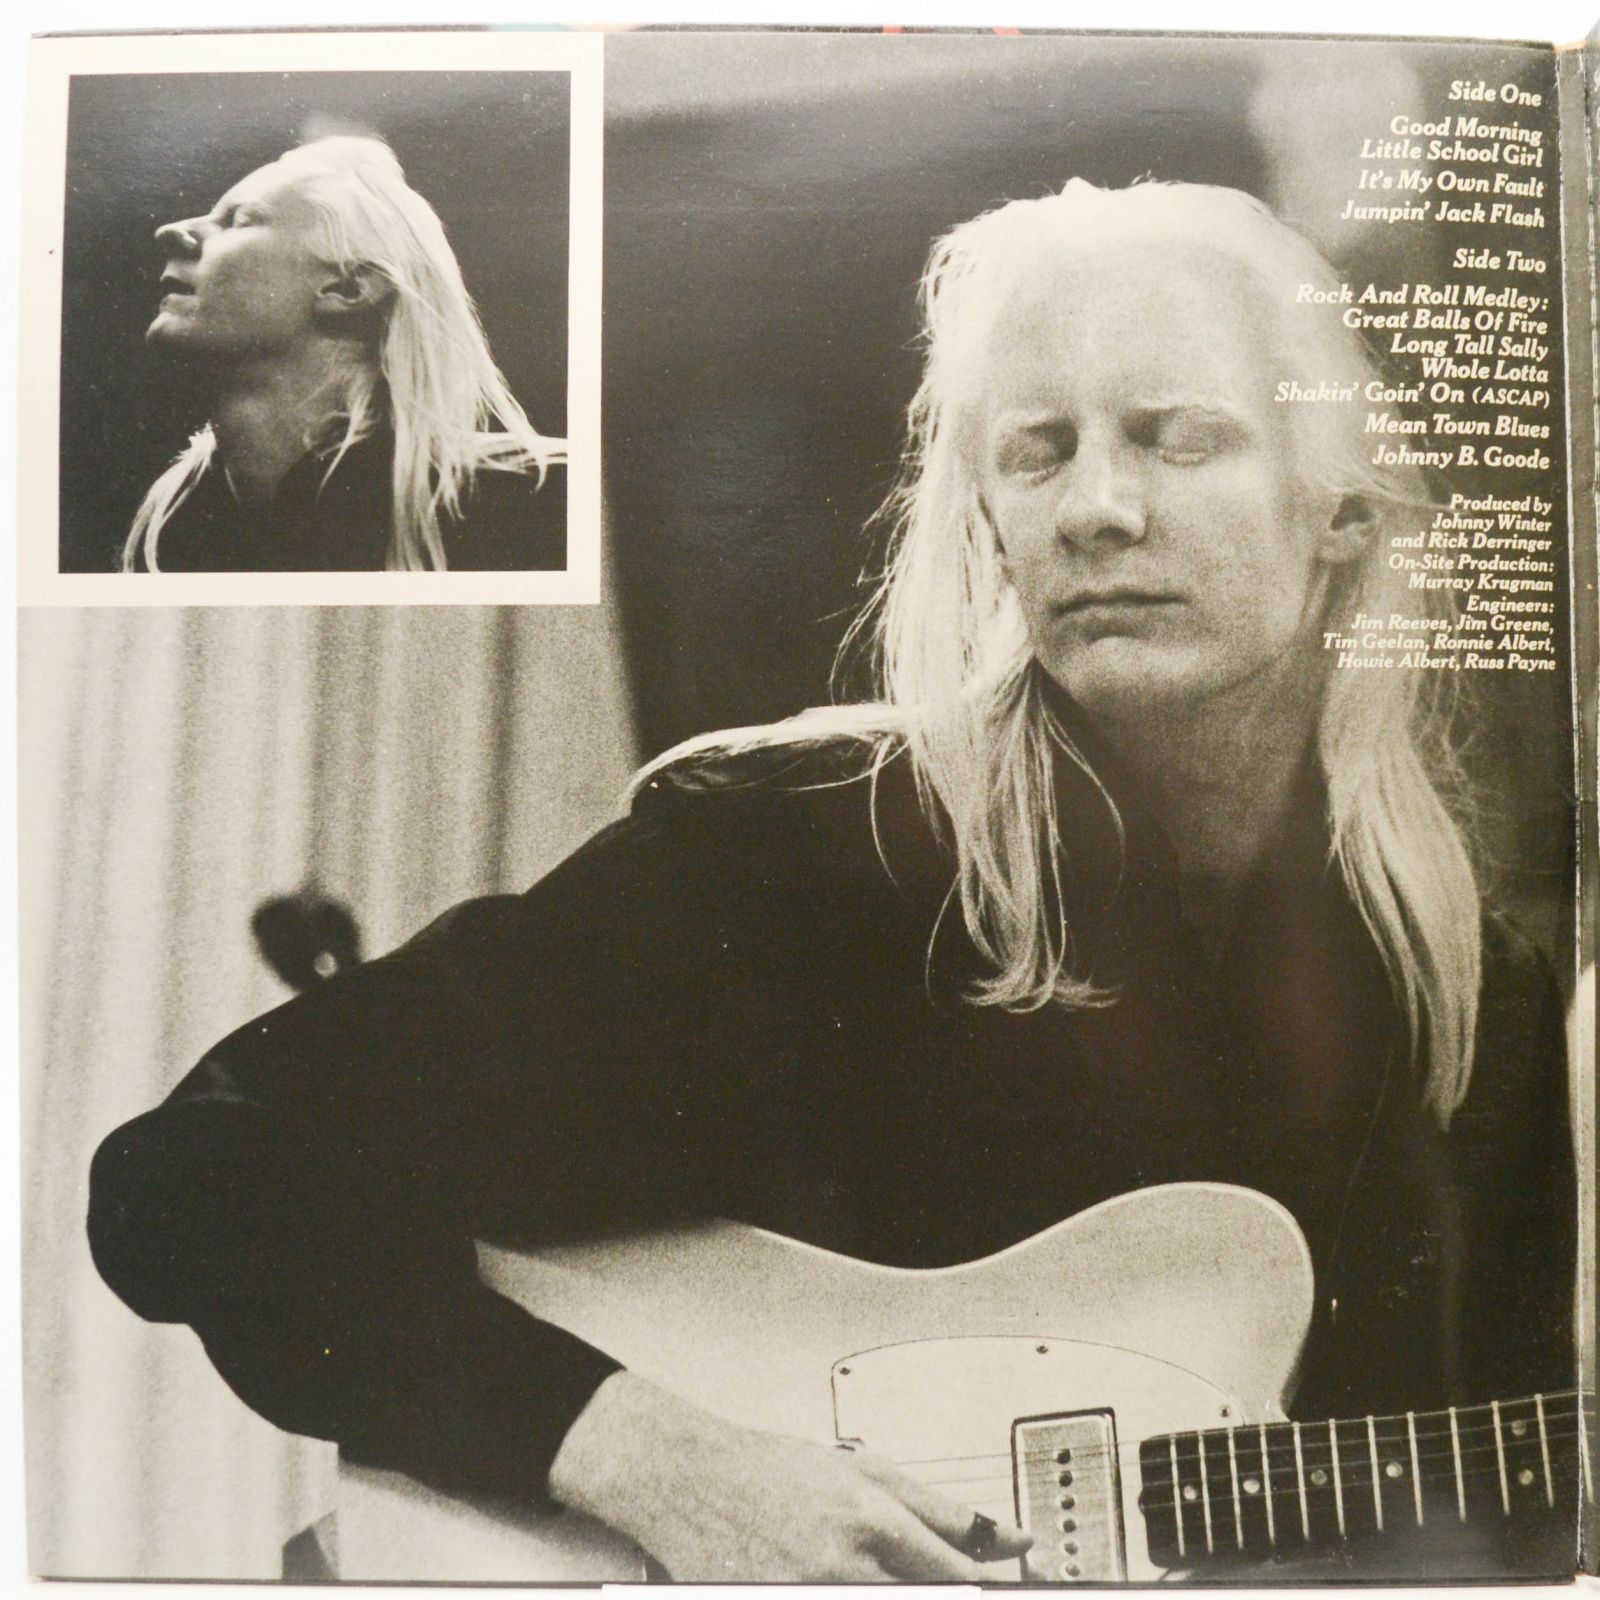 Johnny Winter — And/Live (2LP), 1975